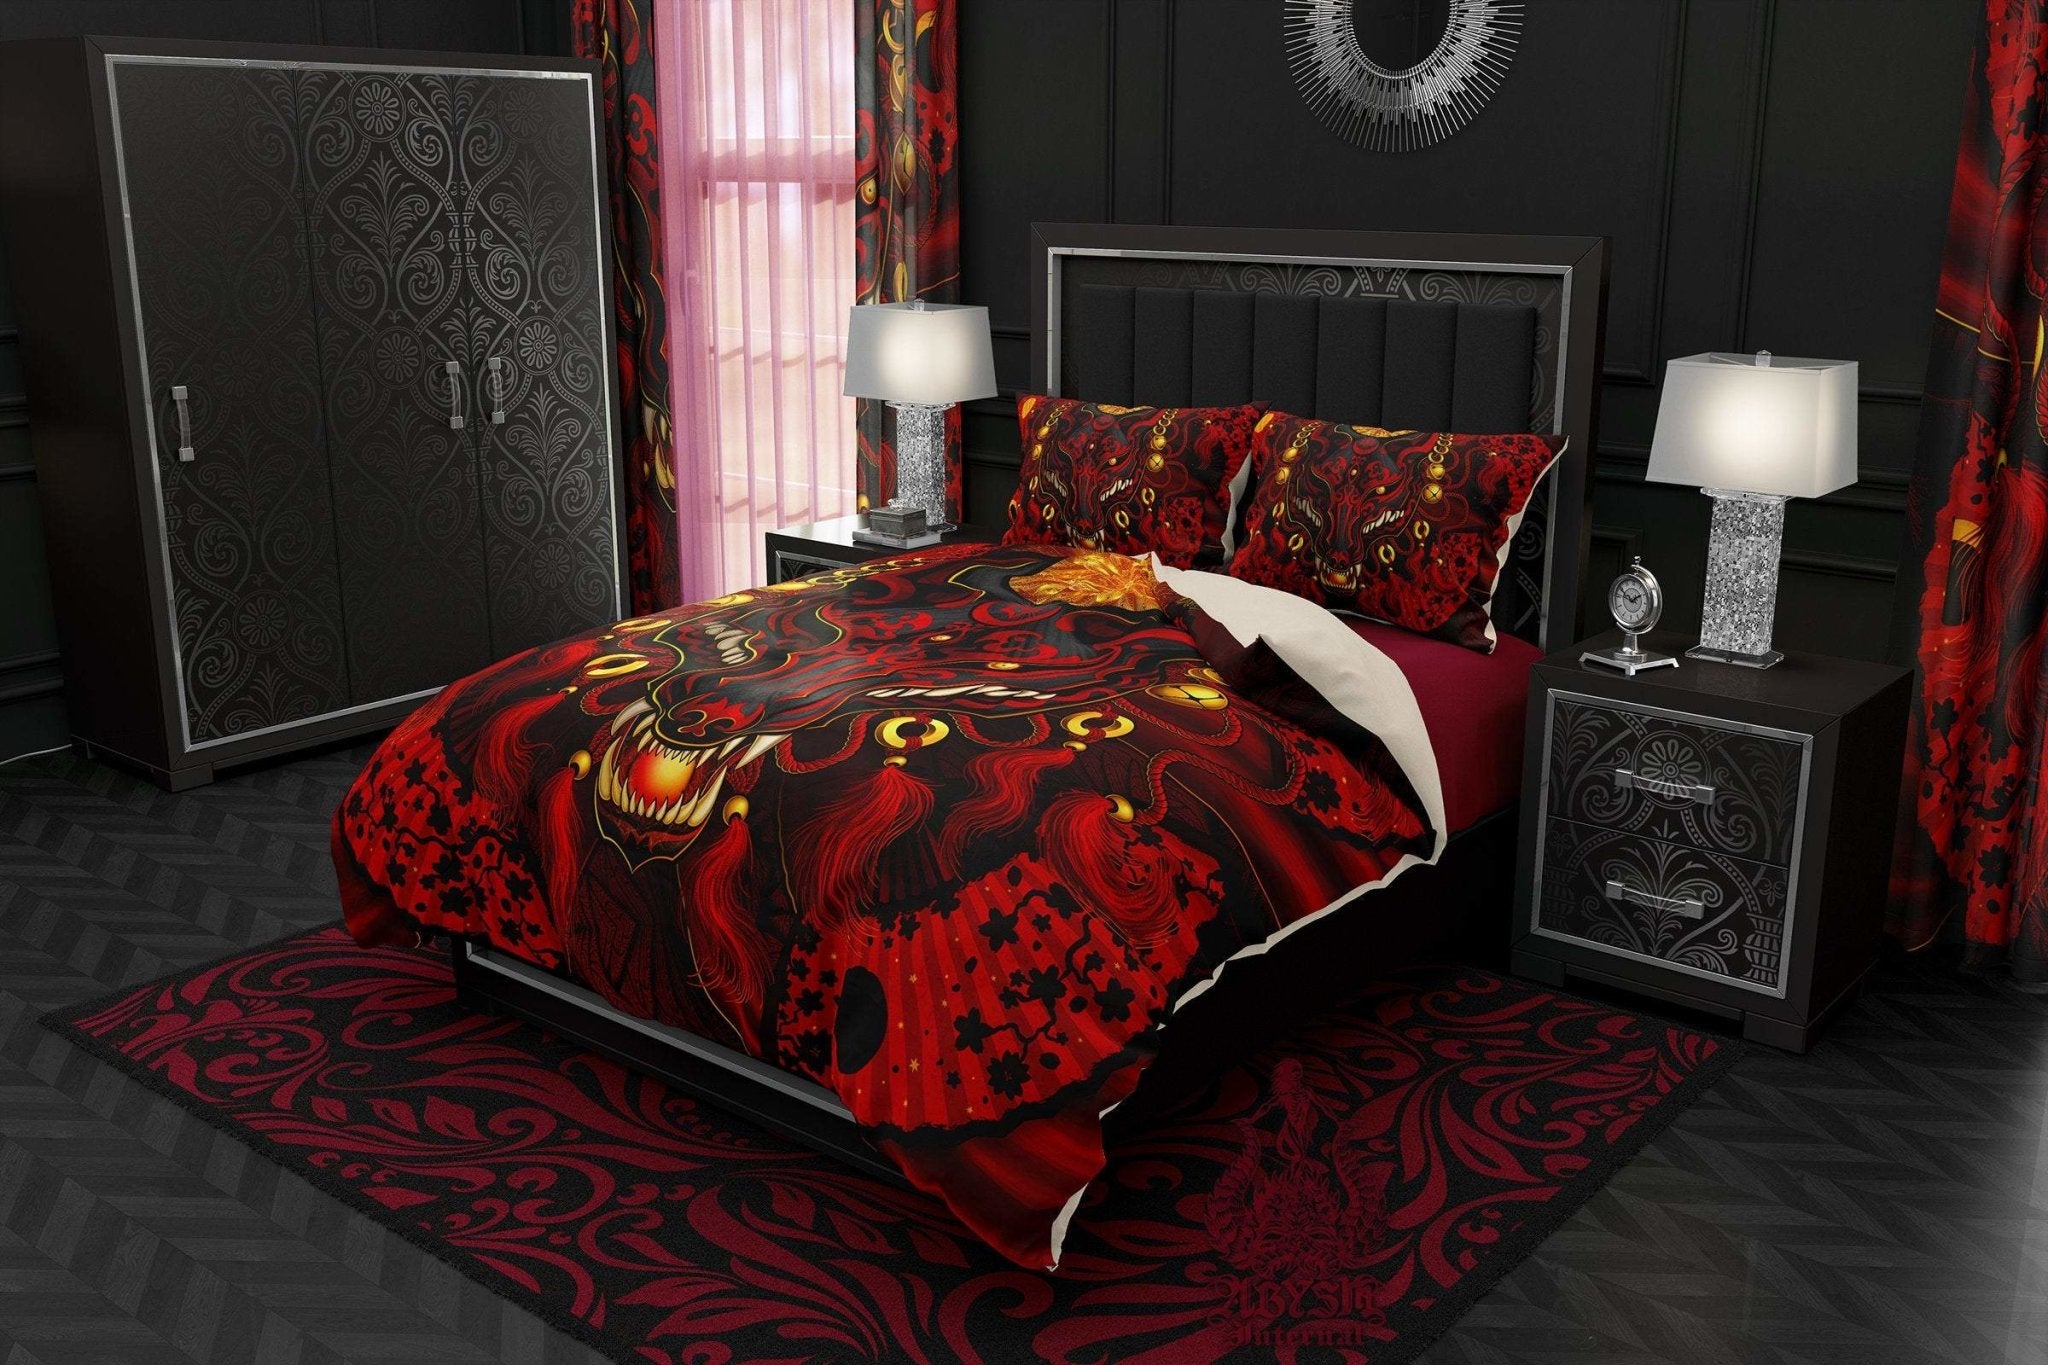 Kitsune Mask Bedding Set, Comforter and Duvet, Gamer Bed Cover and Bedroom Decor, Japanese Fox Mask, Okami, King, Queen and Twin Size - Red and Black - Abysm Internal